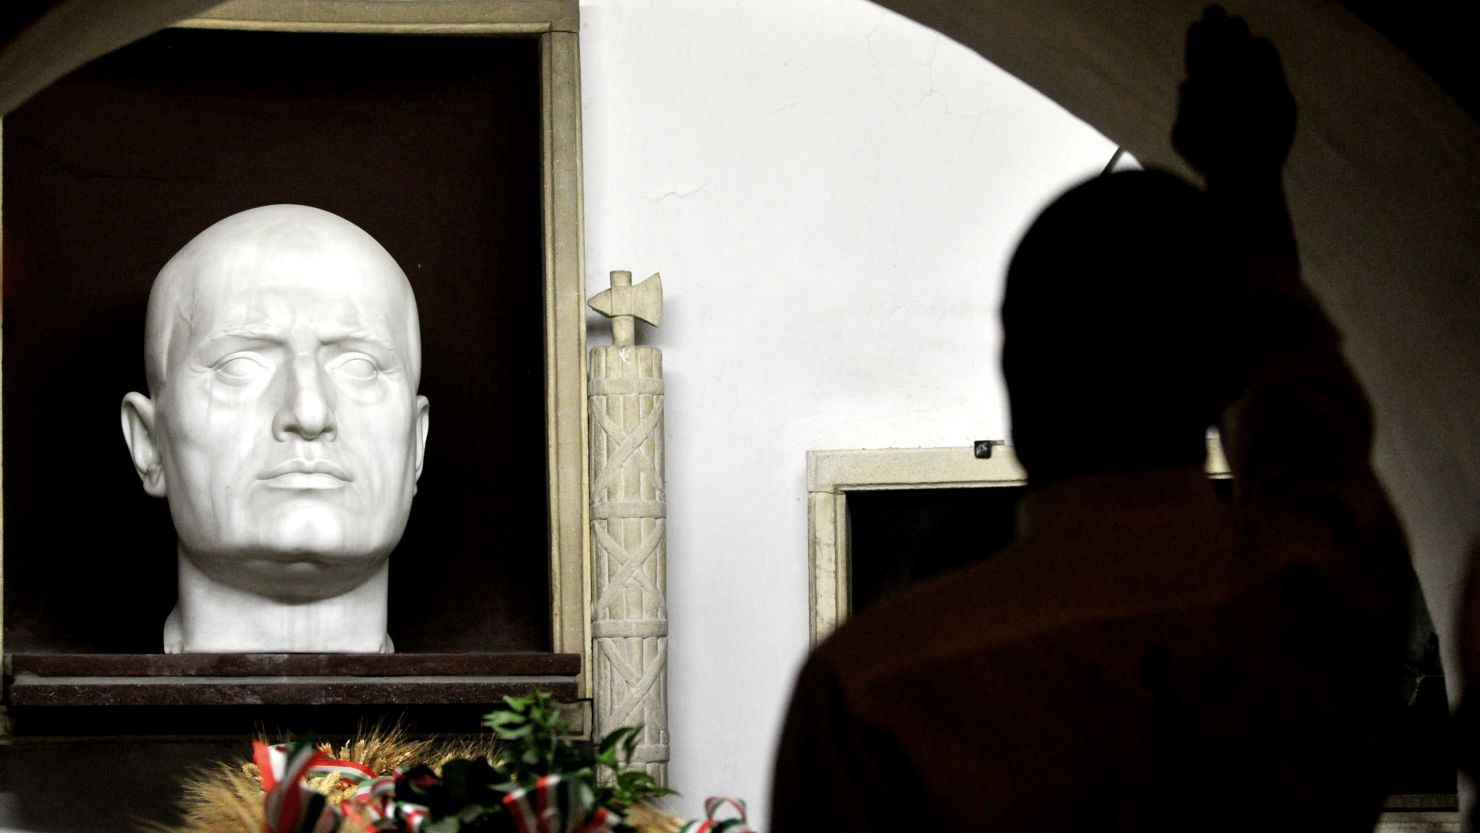 Predappio, Mussolini's birthplace, also hosts the executed dictator's tomb.